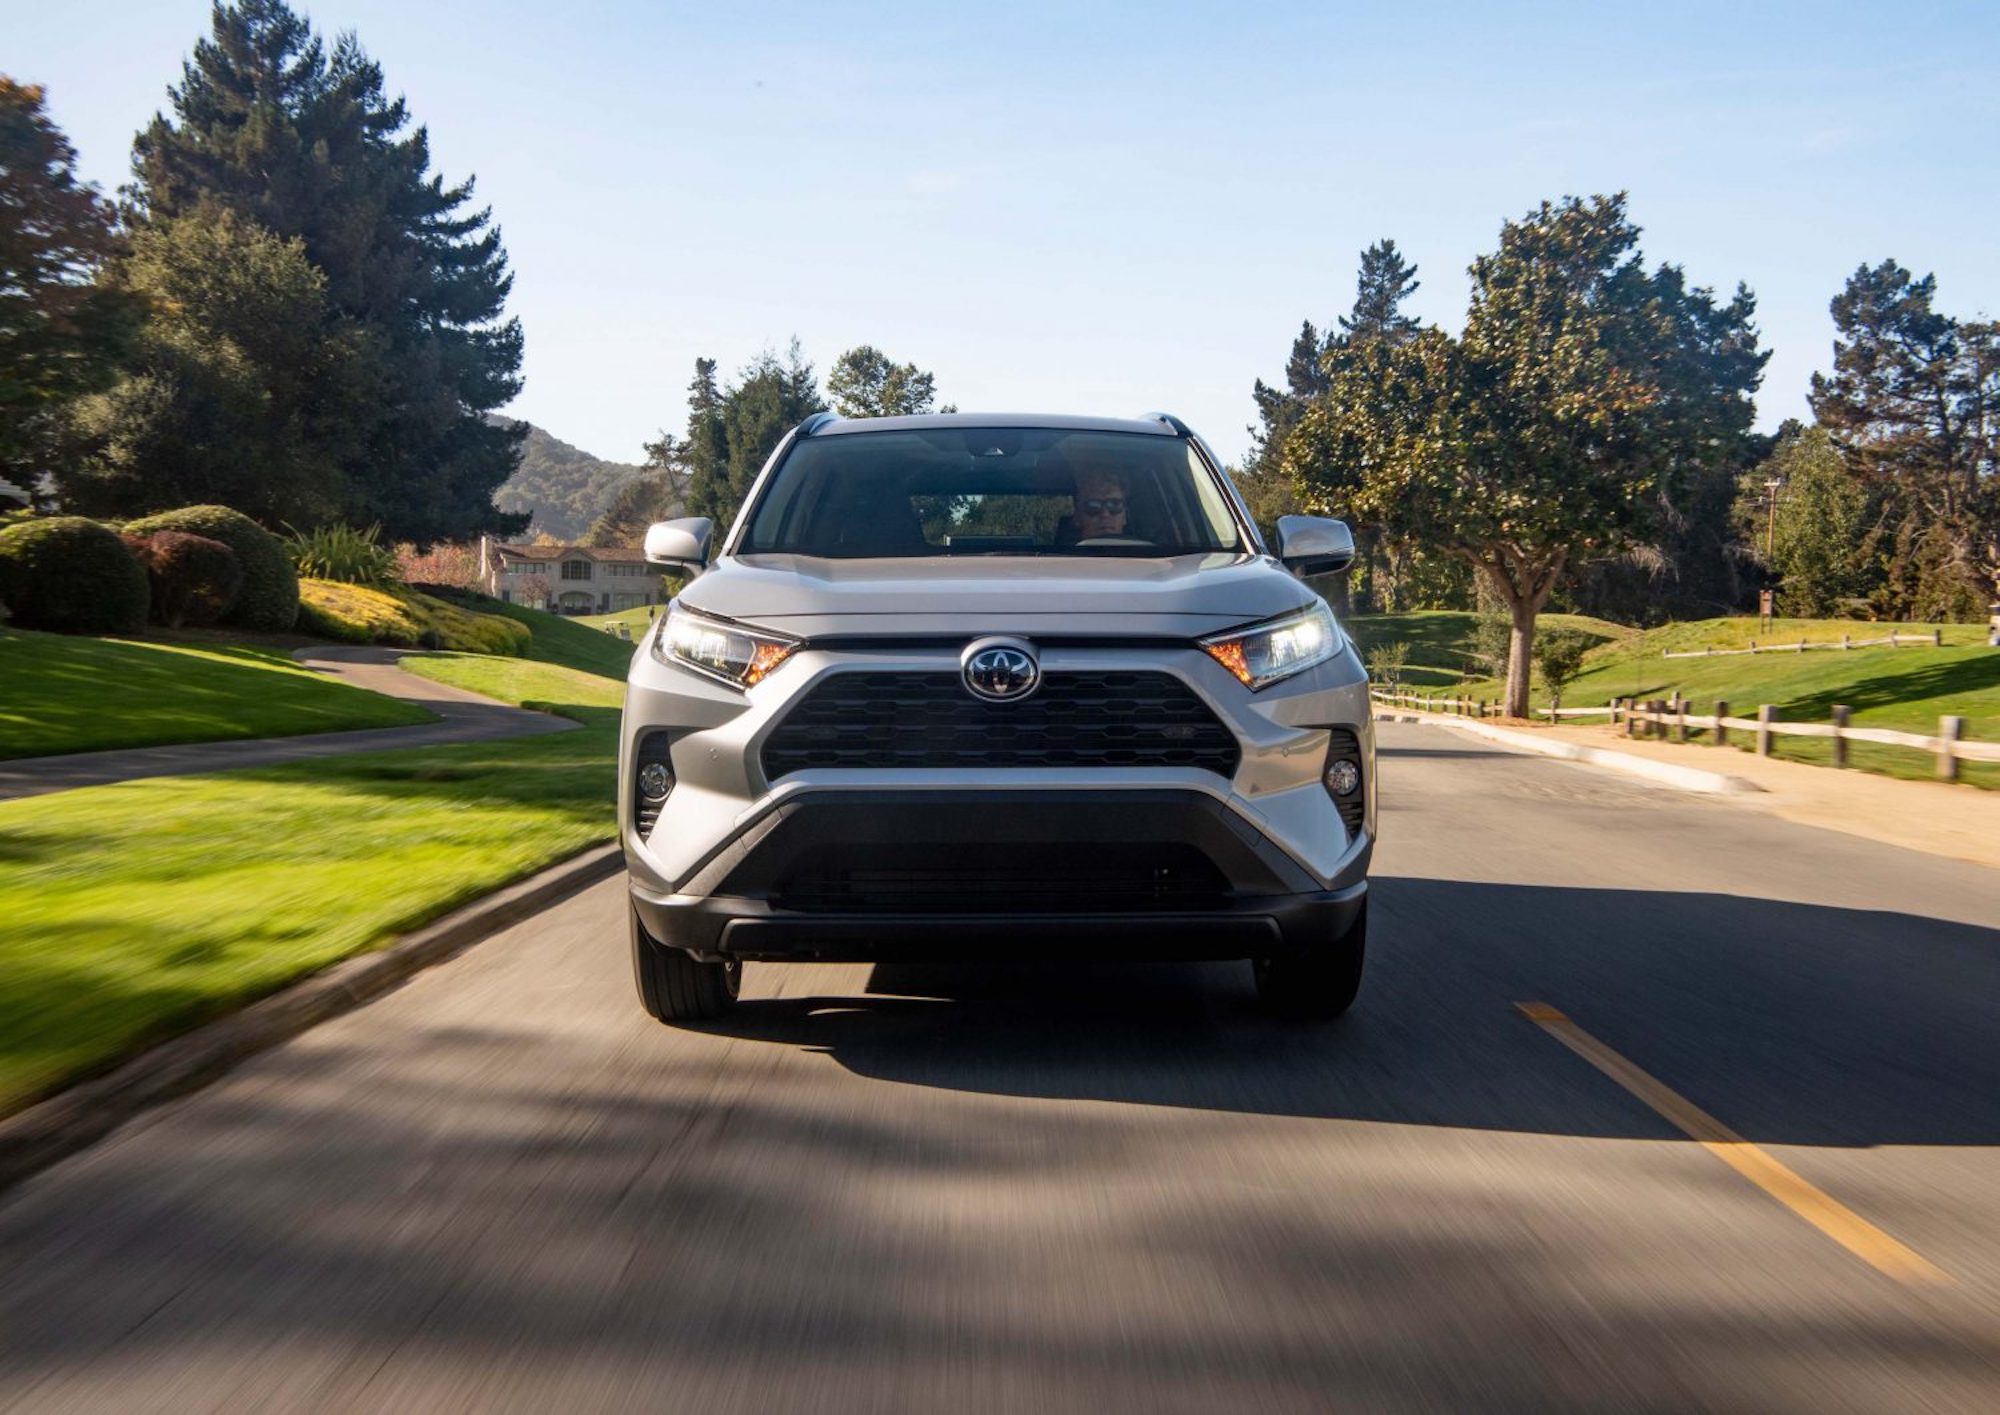 A silver 2021 Toyota RAV4 XLE front-wheel-drive compact crossover SUV on a suburban street